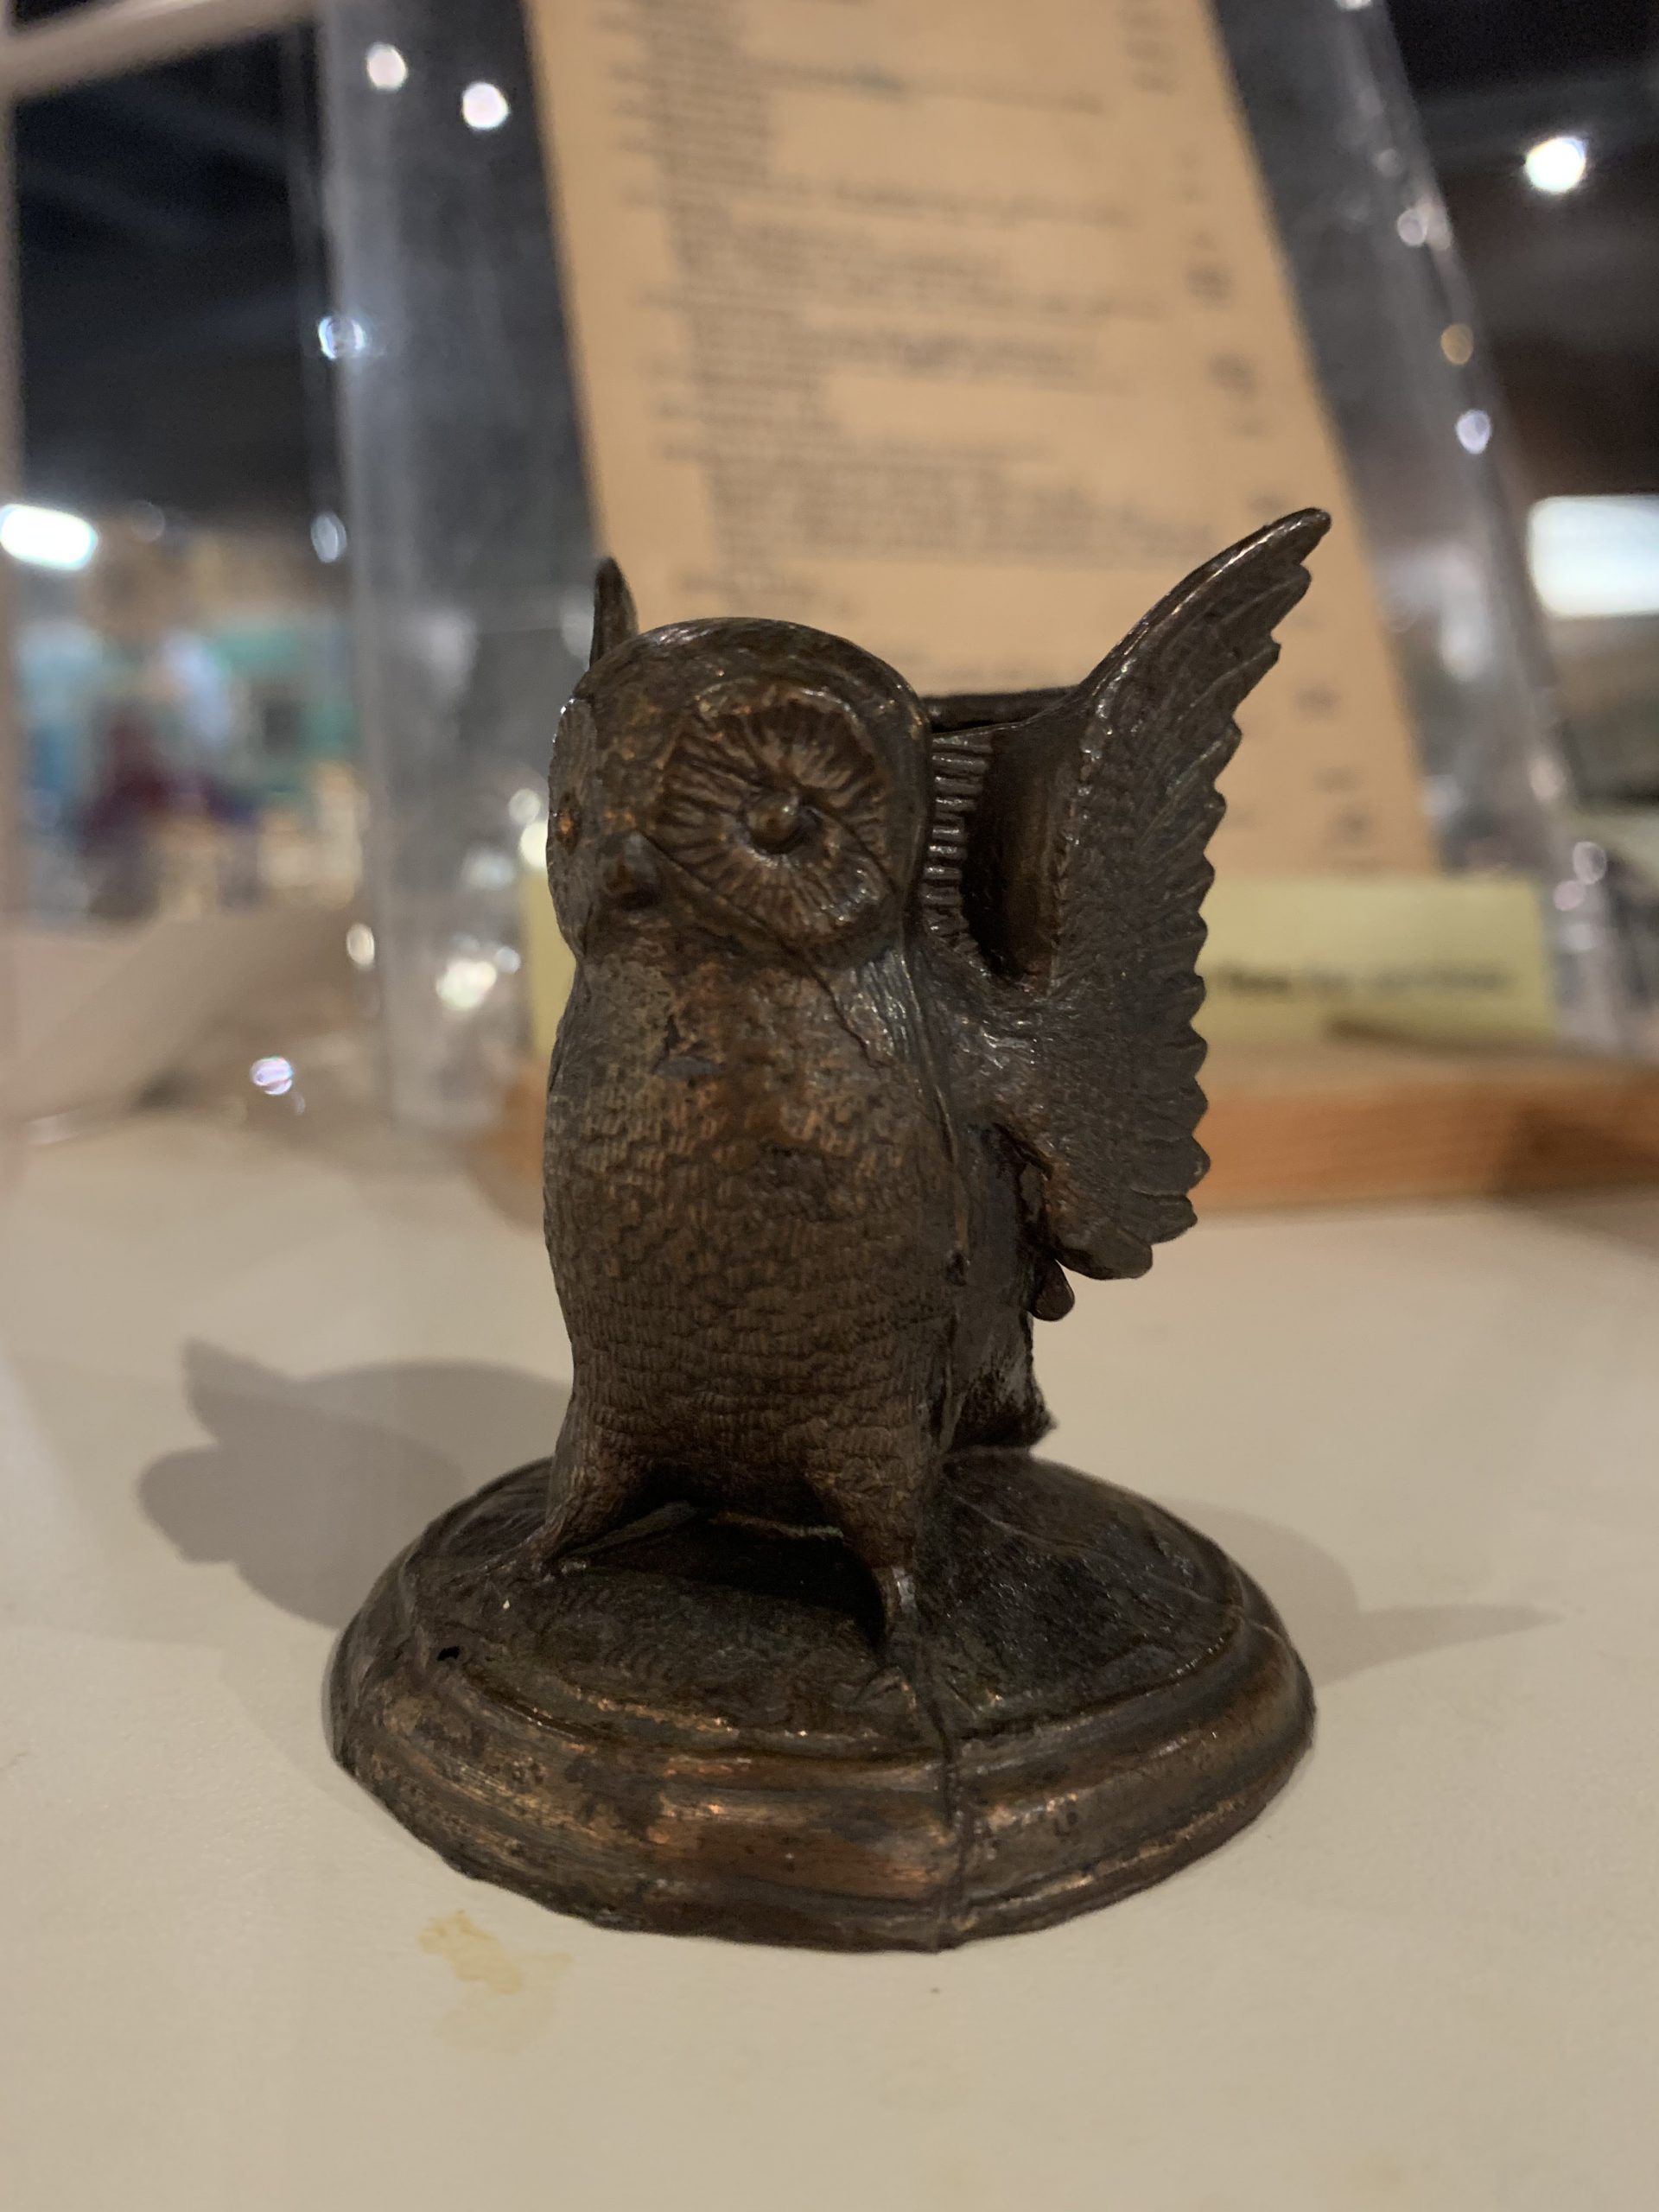 Bird Figurine, c. 1950. Hastings Museum Souvenir. Iris Daugherty Nunley sculpted the original figure used to make casts for resale in the Museum gift shop.